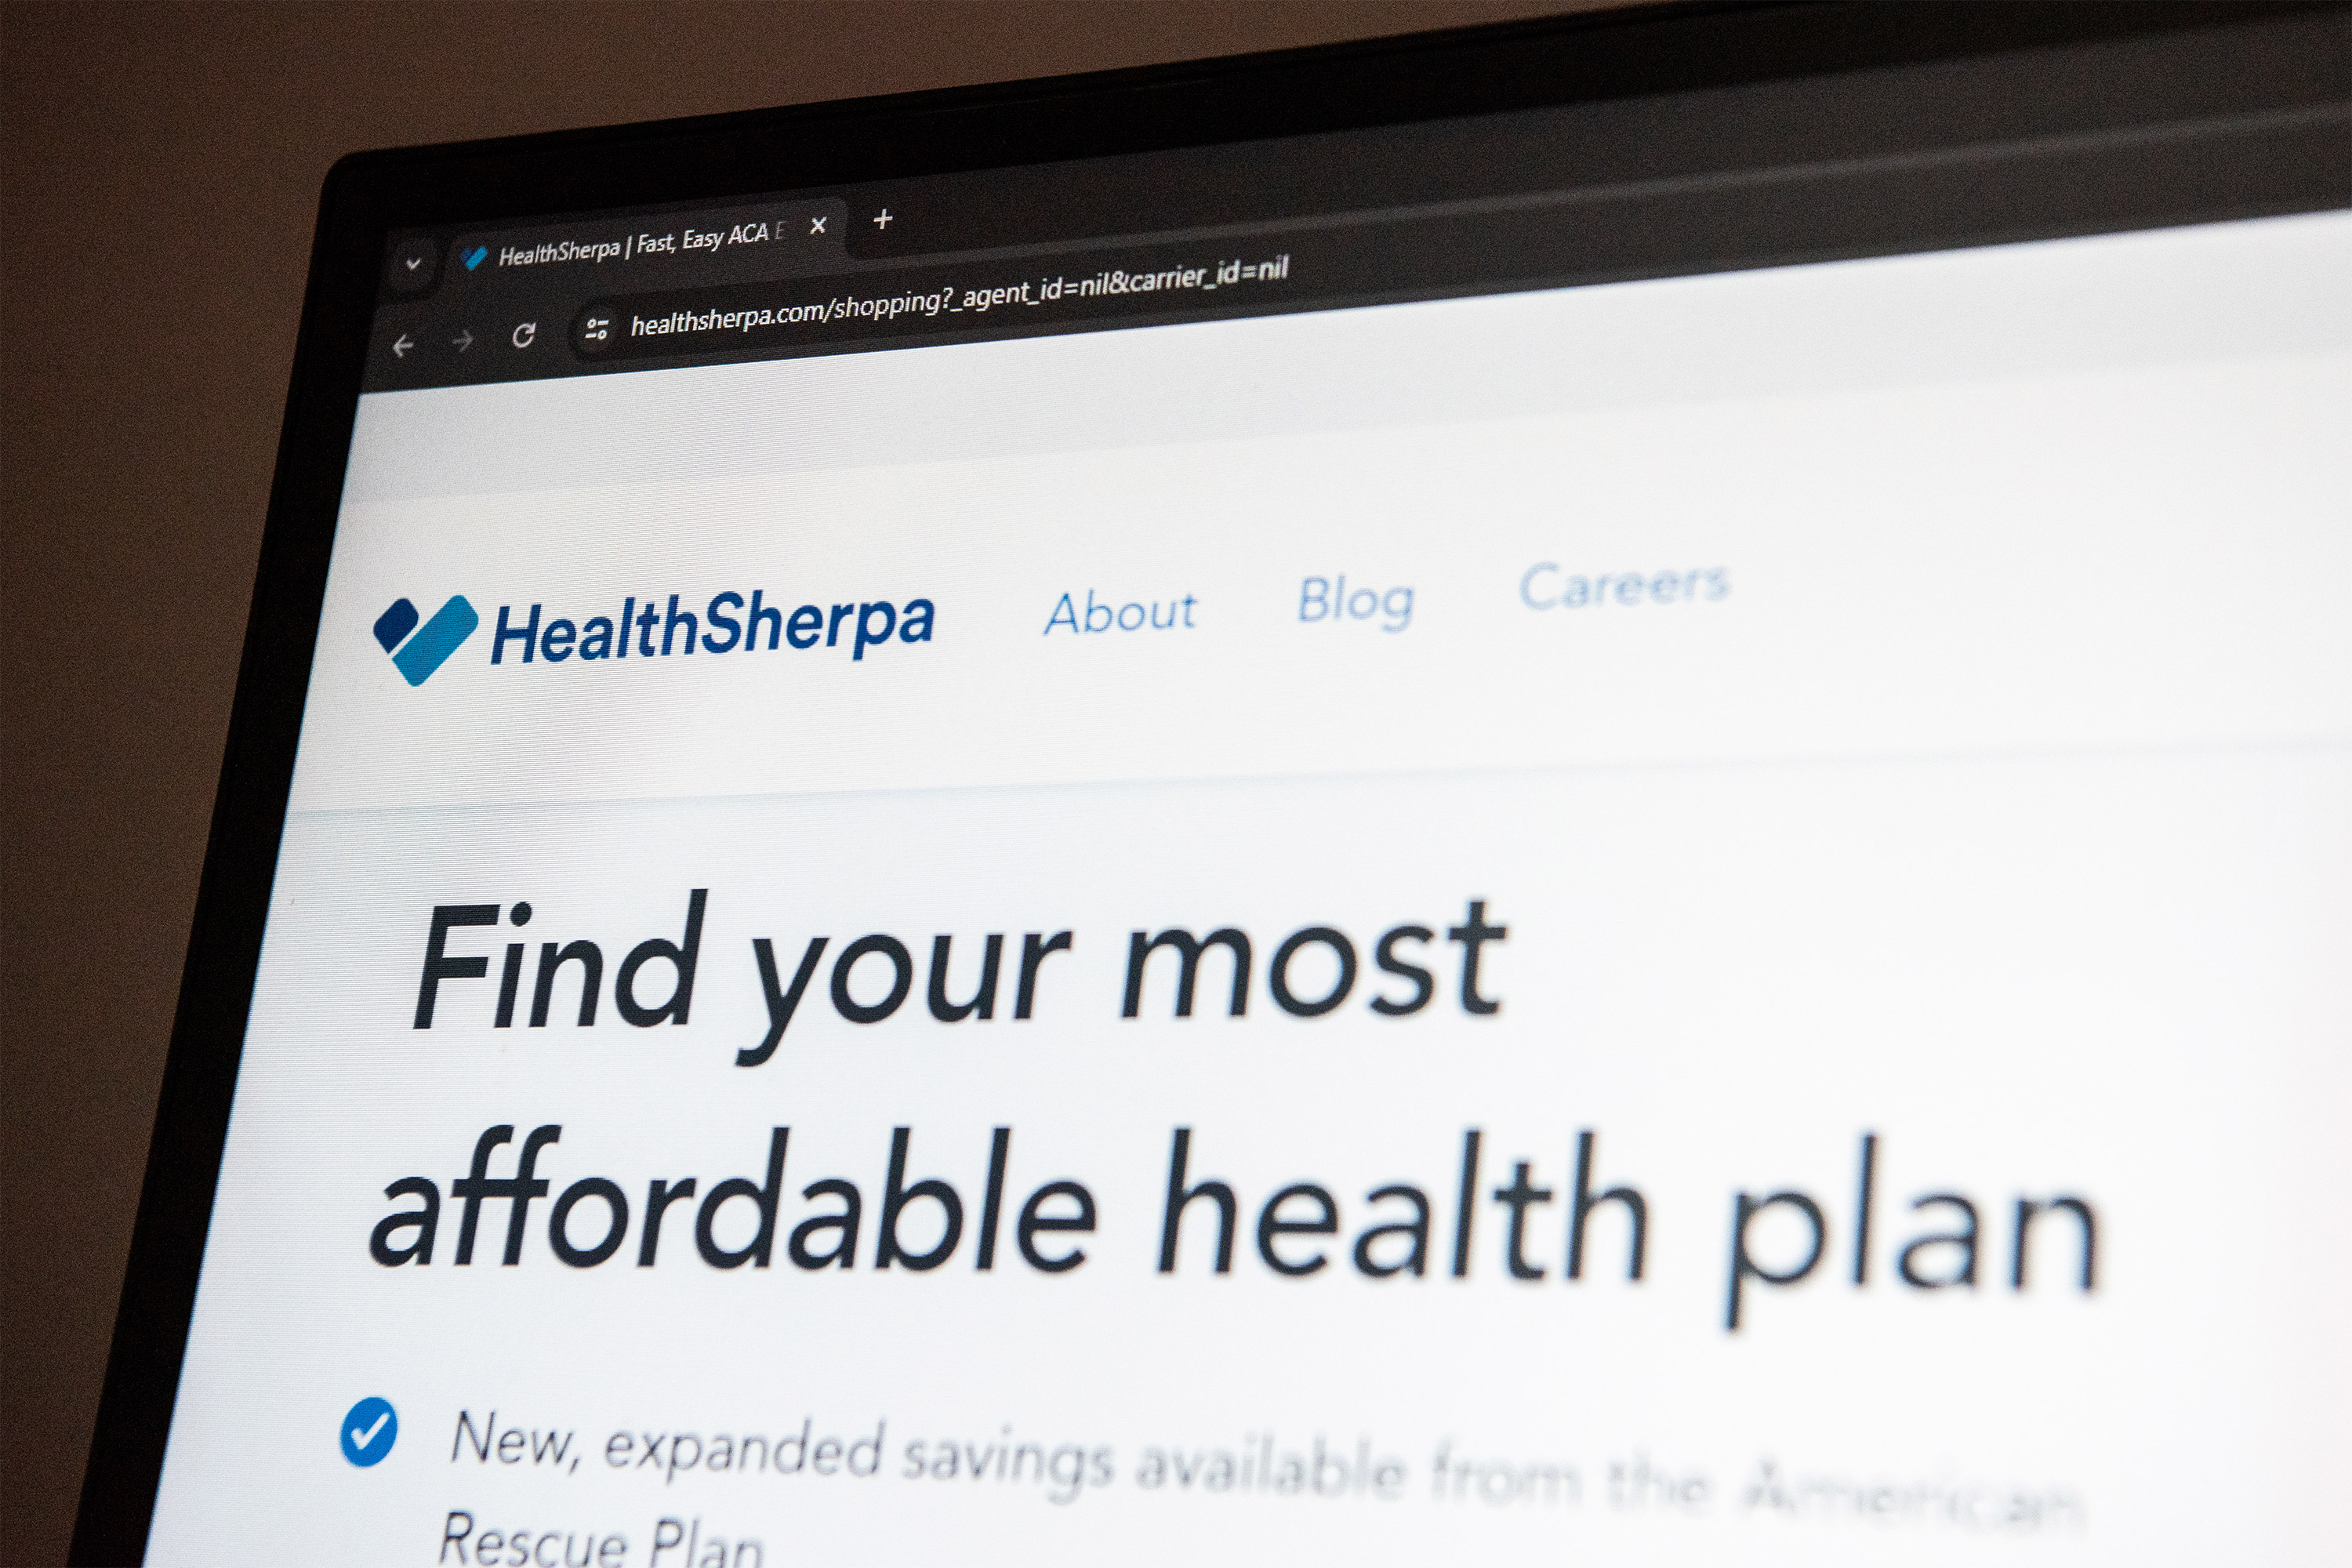 HealthSherpa and Insurers Workforce Up To Curb Unauthorized ACA Enrollment Schemes